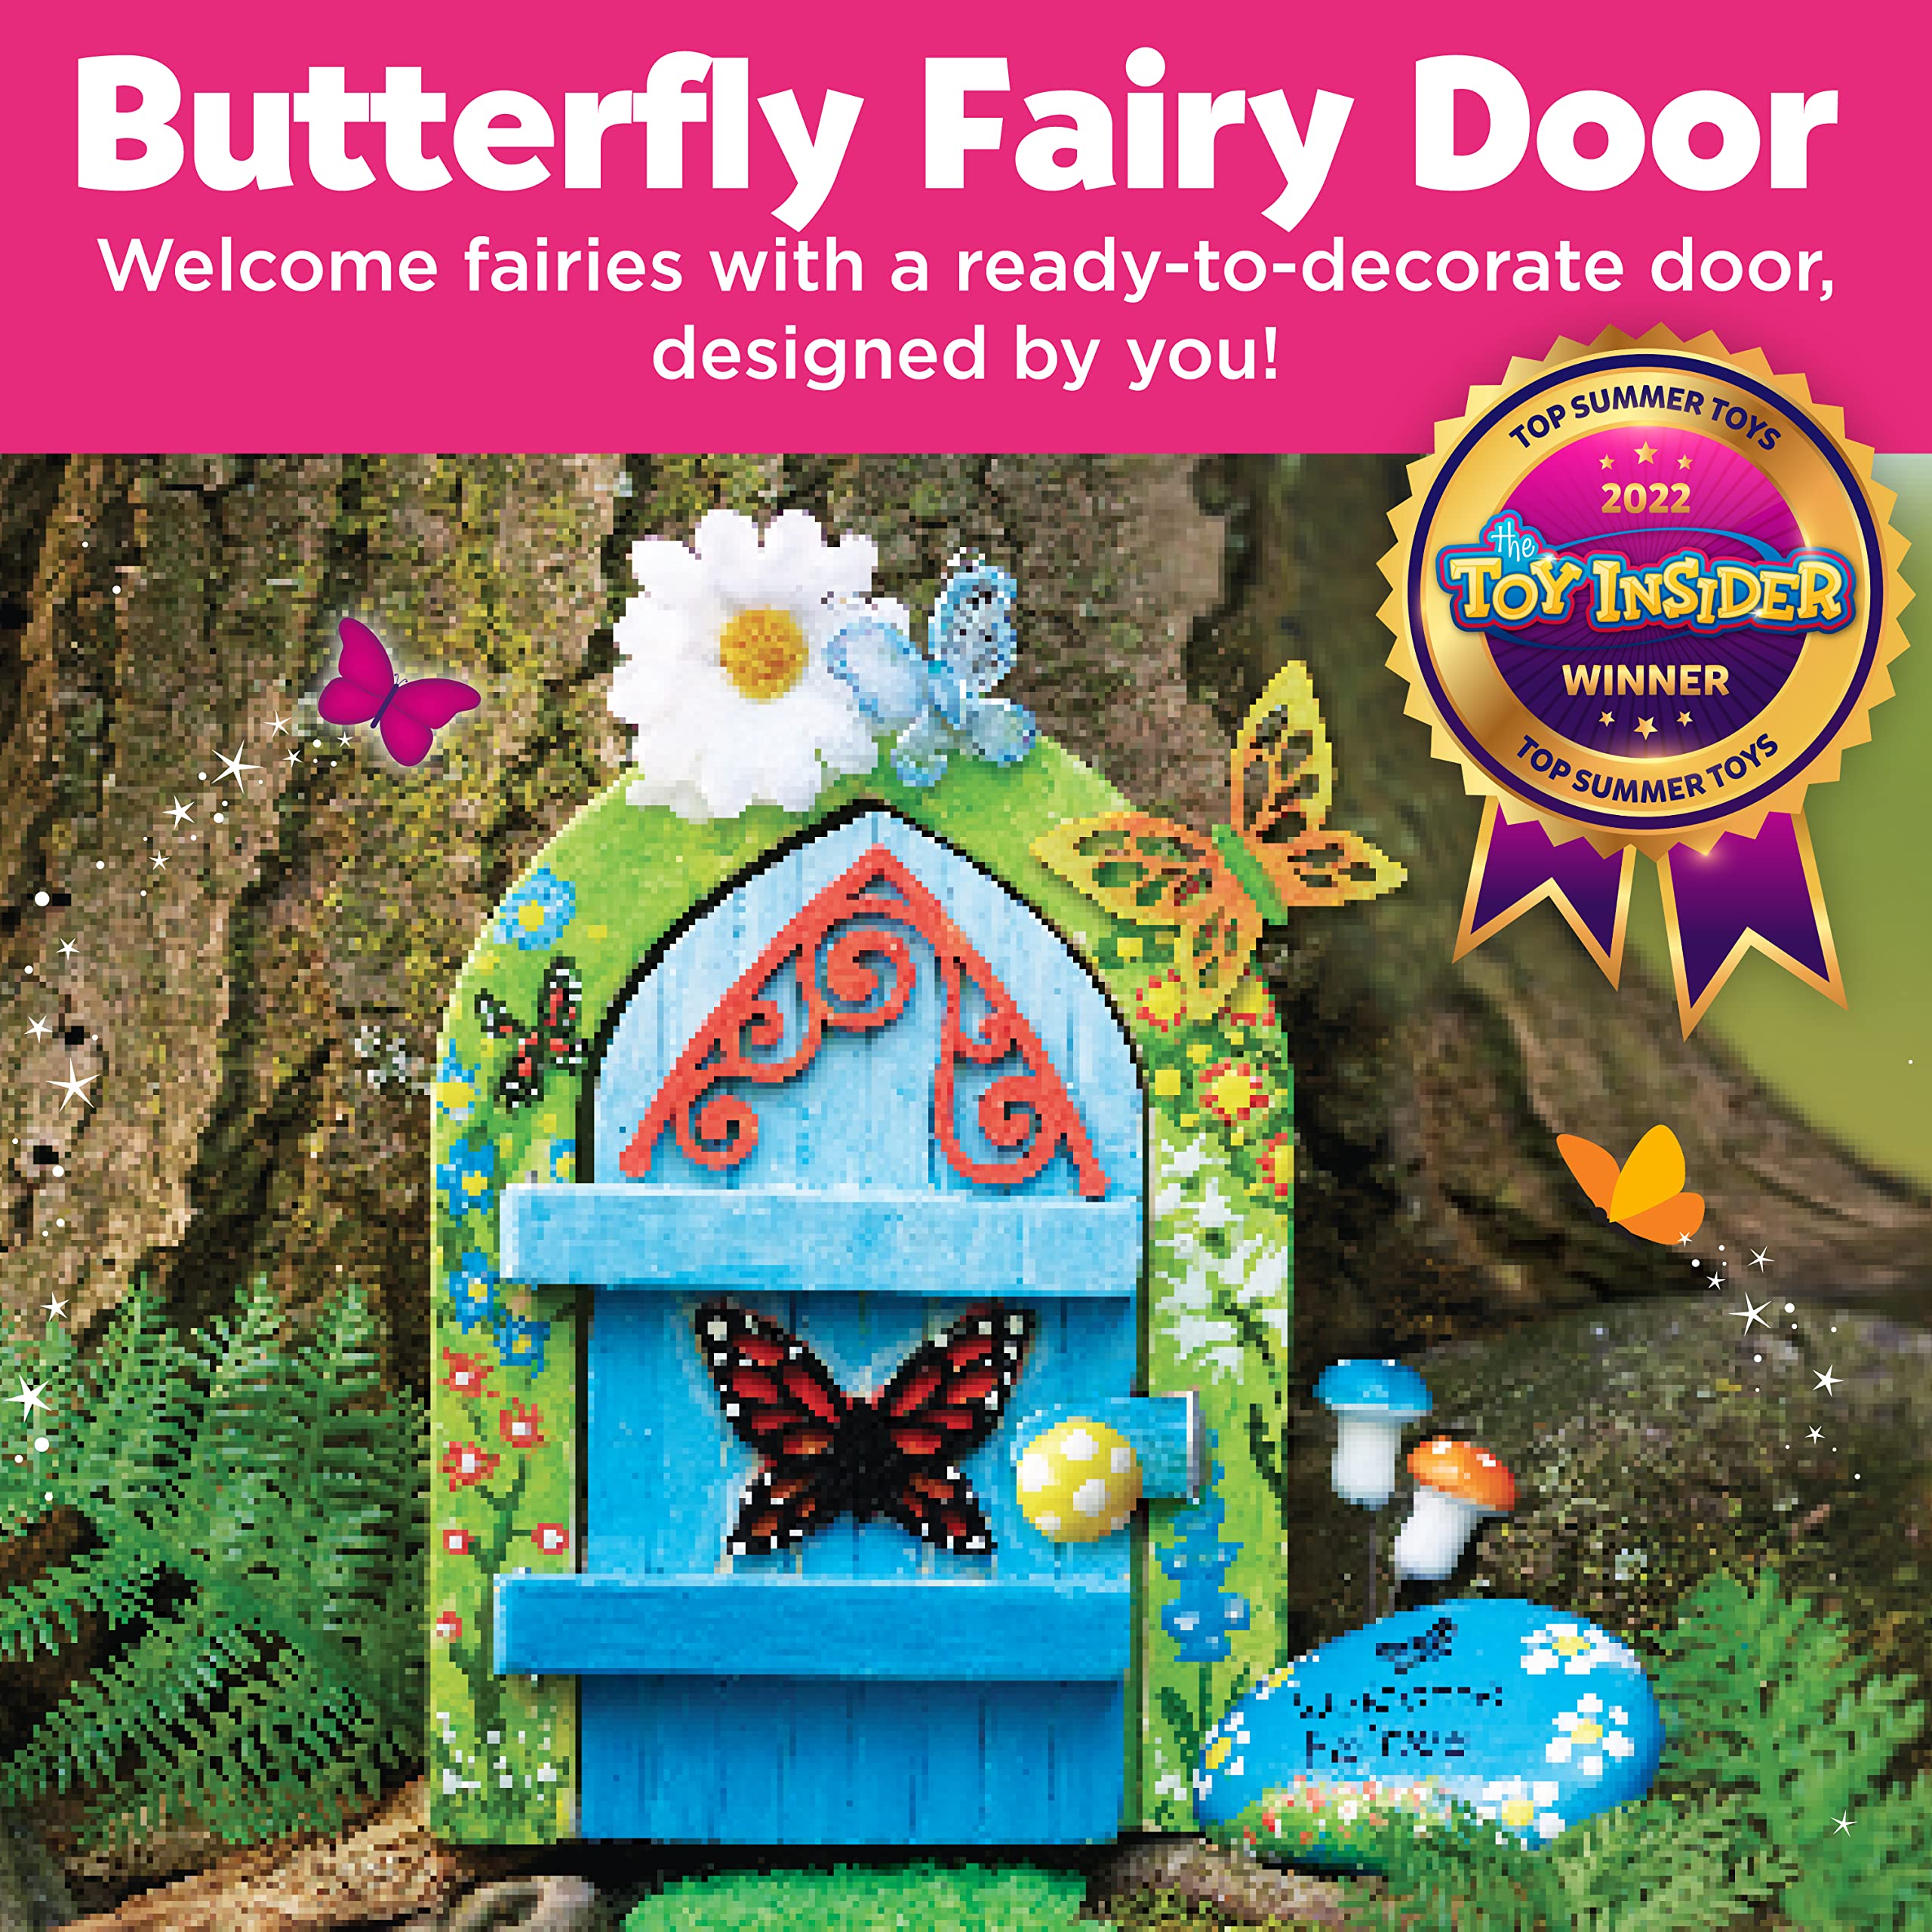 Creativity for Kids Butterfly Fairy Door Kit - Painting Arts and Crafts for Kids, Creative Gifts for Girls and Boys Age 6-7+ Yellow